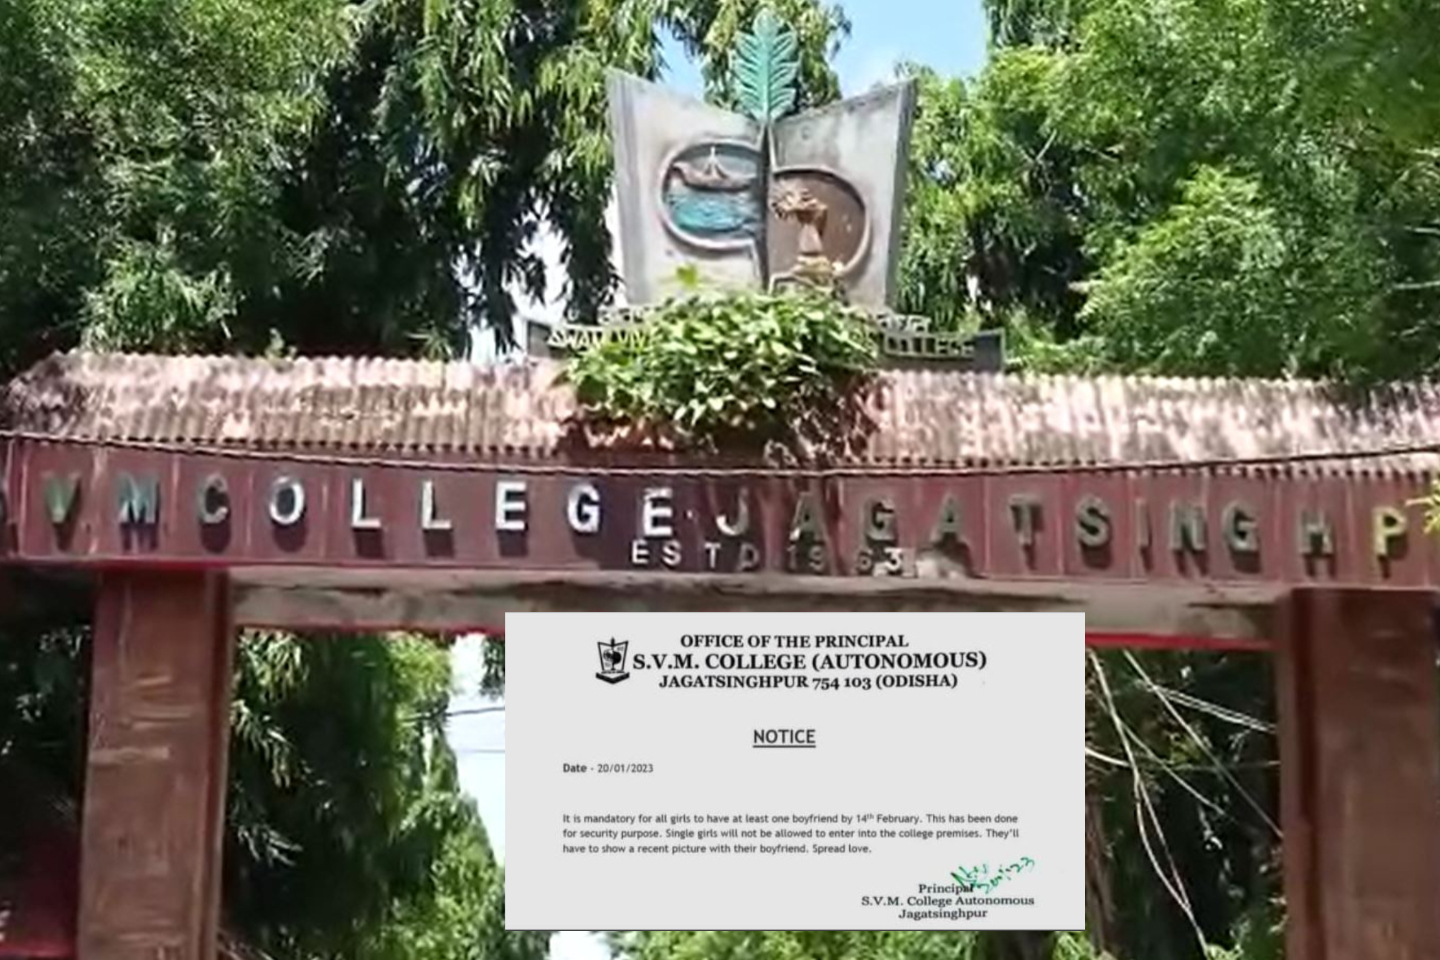 Those Girl Students Haven't Boyfriend Can't Enter In SVM College Jagatsinghpur, Fake Notice Goes Viral